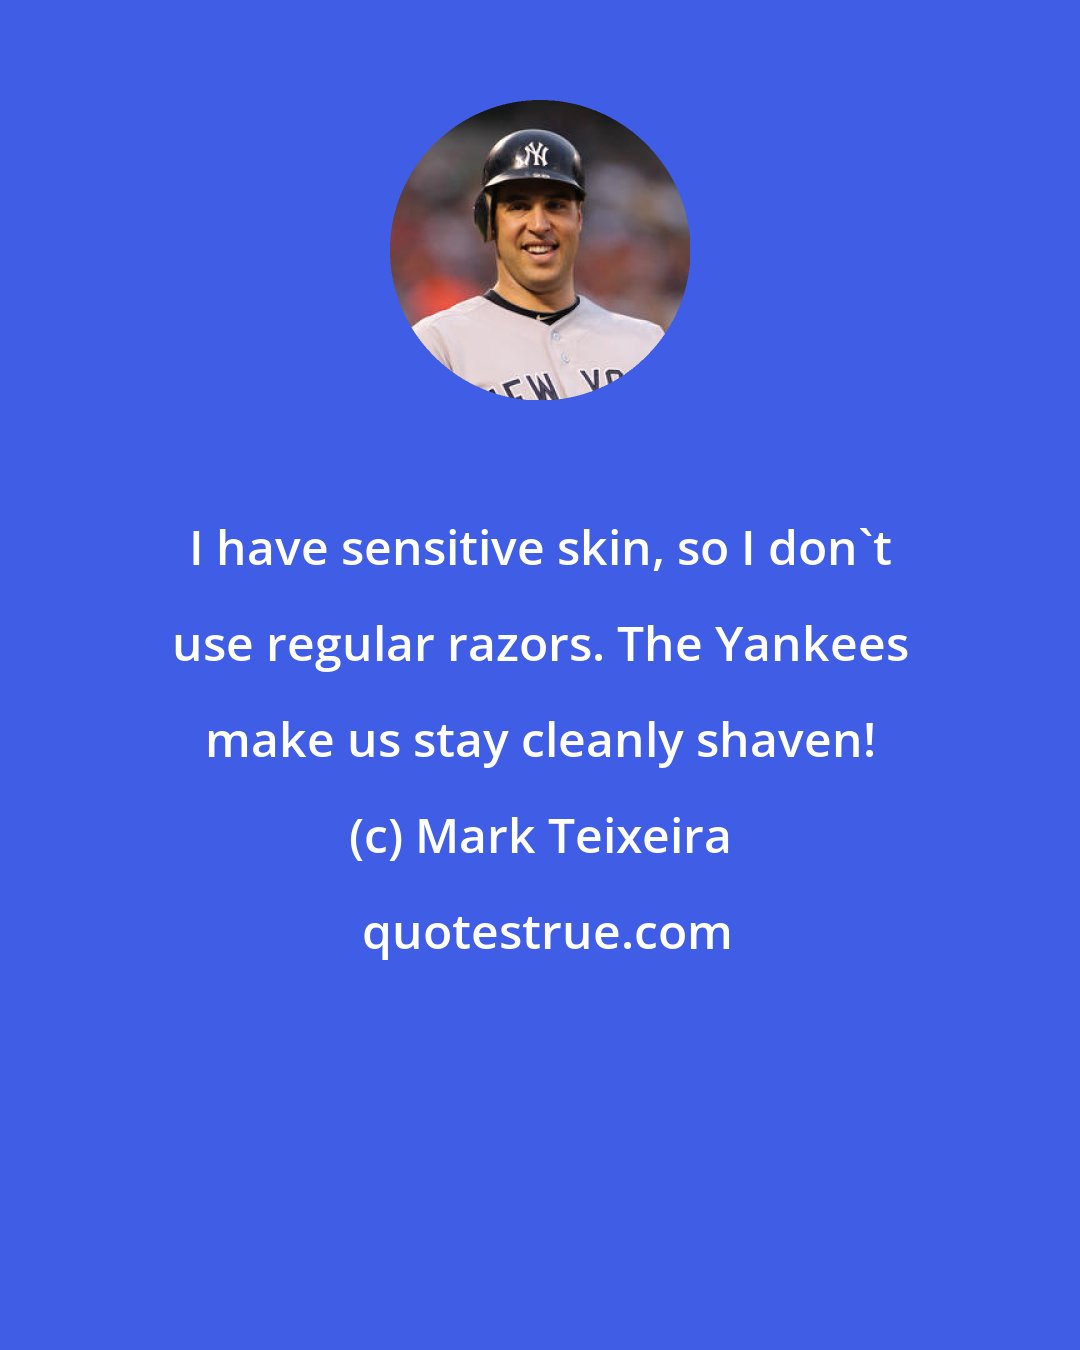 Mark Teixeira: I have sensitive skin, so I don't use regular razors. The Yankees make us stay cleanly shaven!